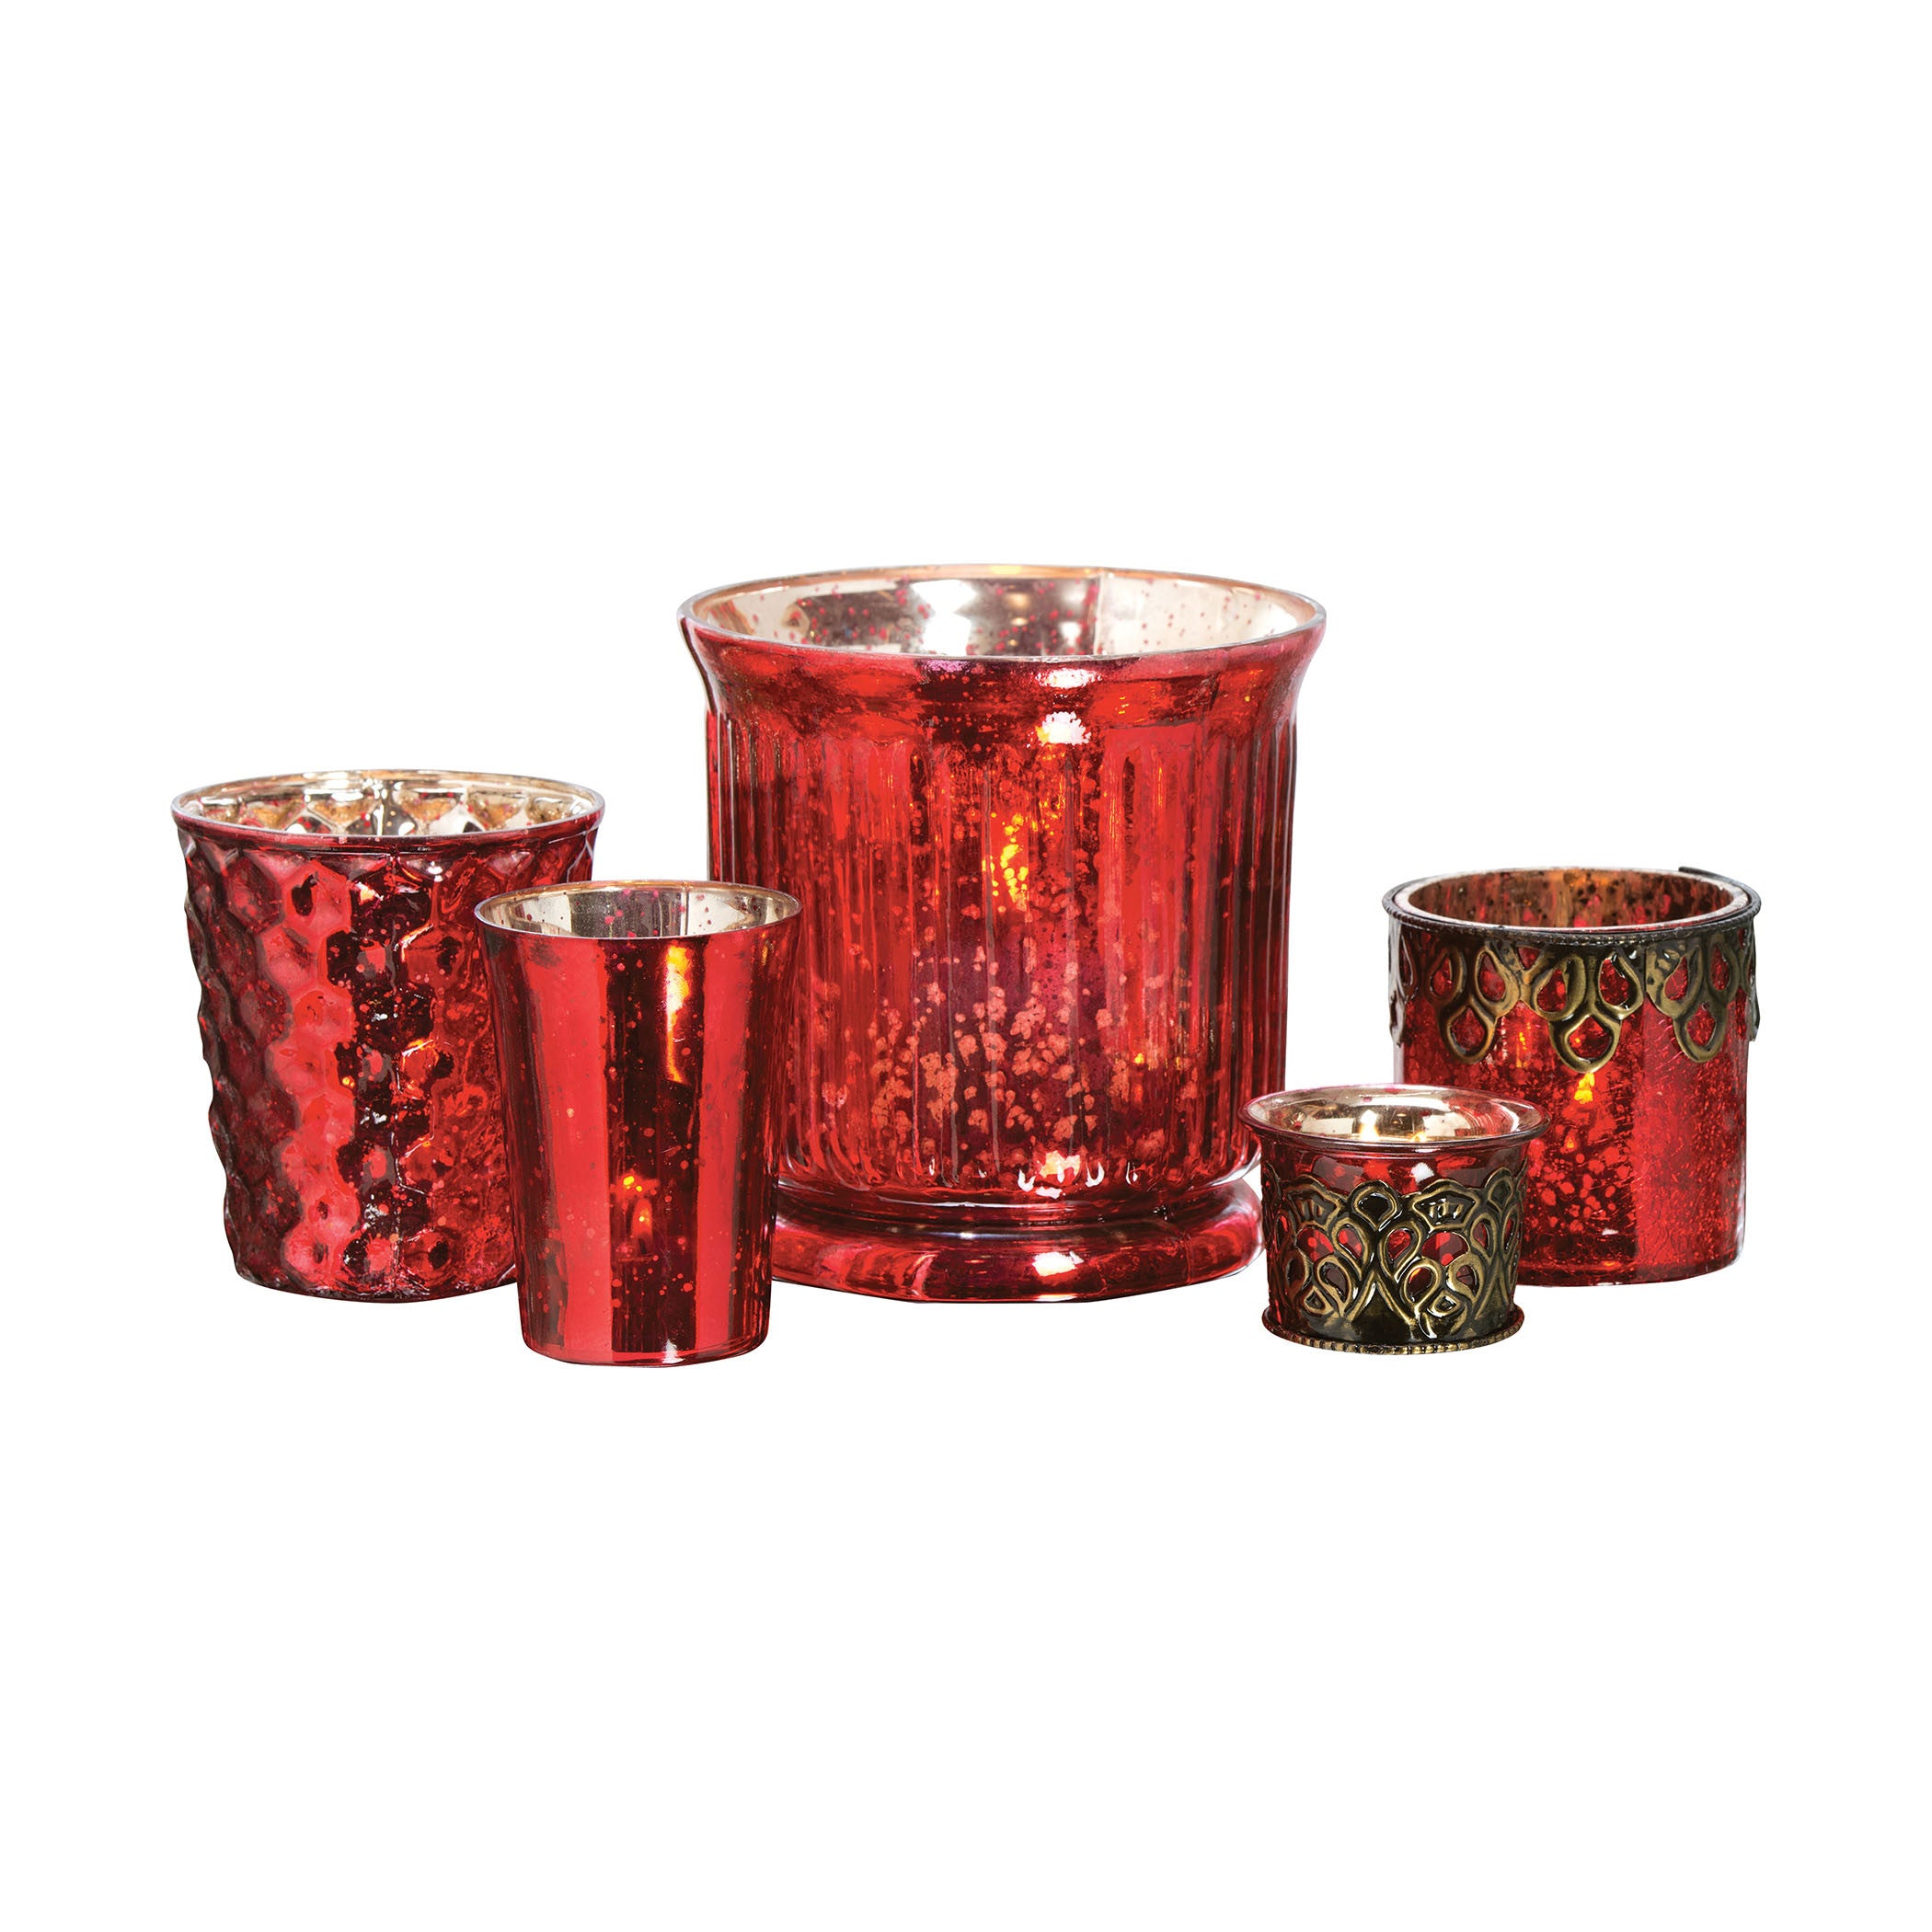 Pomeroy Pom-571510 Audrey Collection Antique Red,antique Bronze Finish Candle/candle Holder